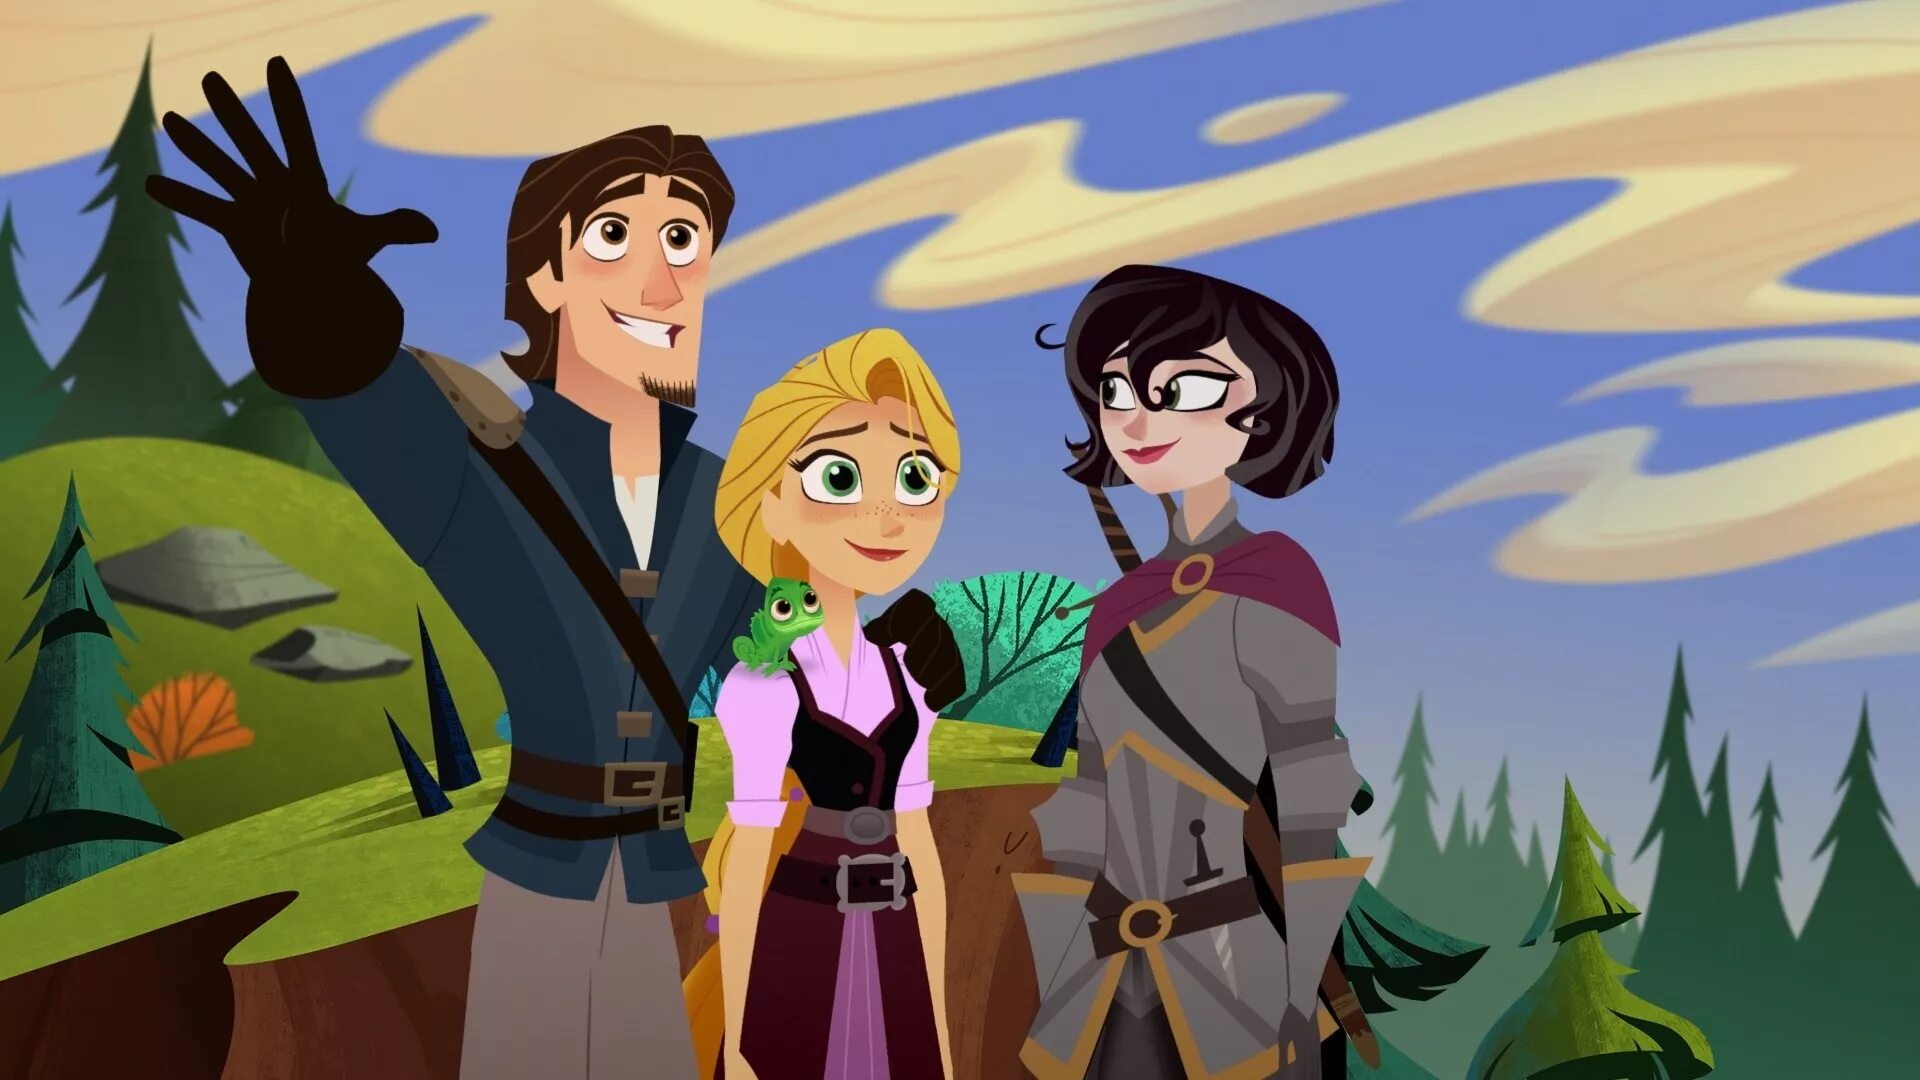 Tangled the series. Tangled the Series Рапунцель. Рапунцель и Юджин и Кассандра. Tangled the Series Юджин и Кассандра.